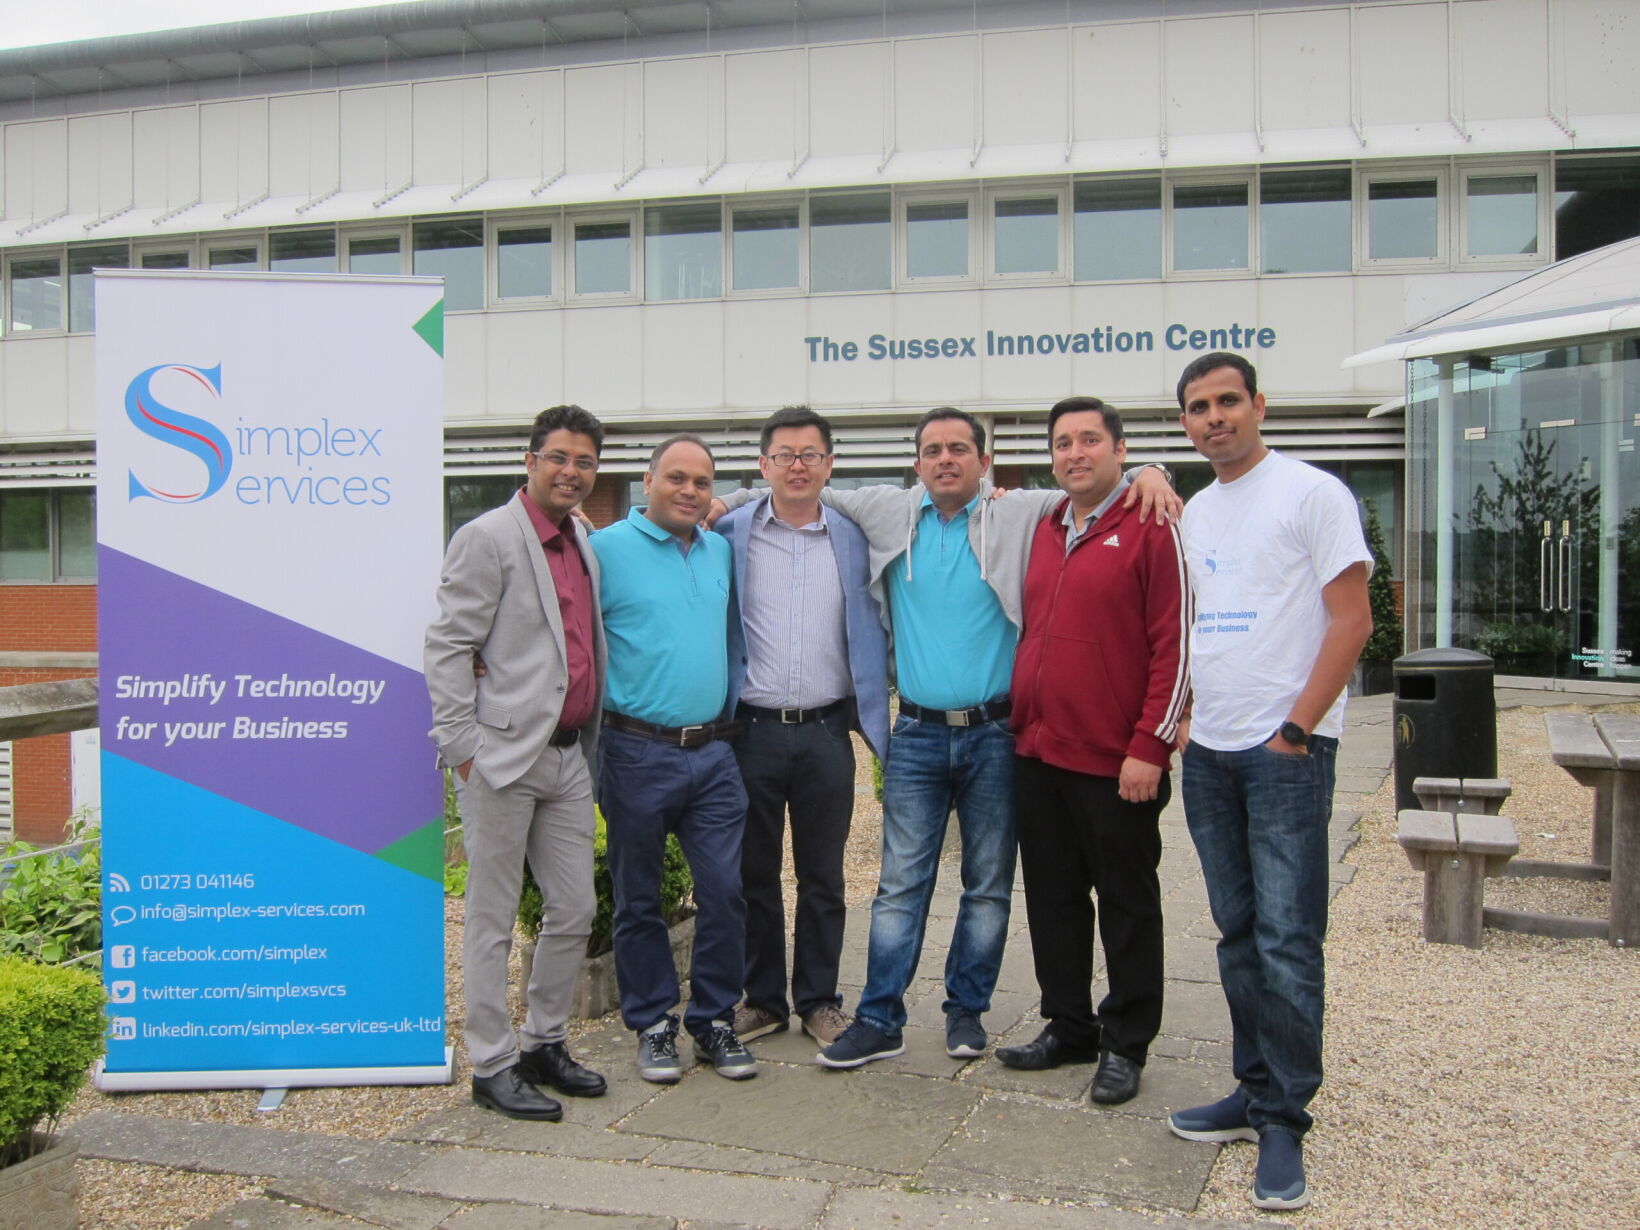 Team Simplex at the Sussex Innovation Centre